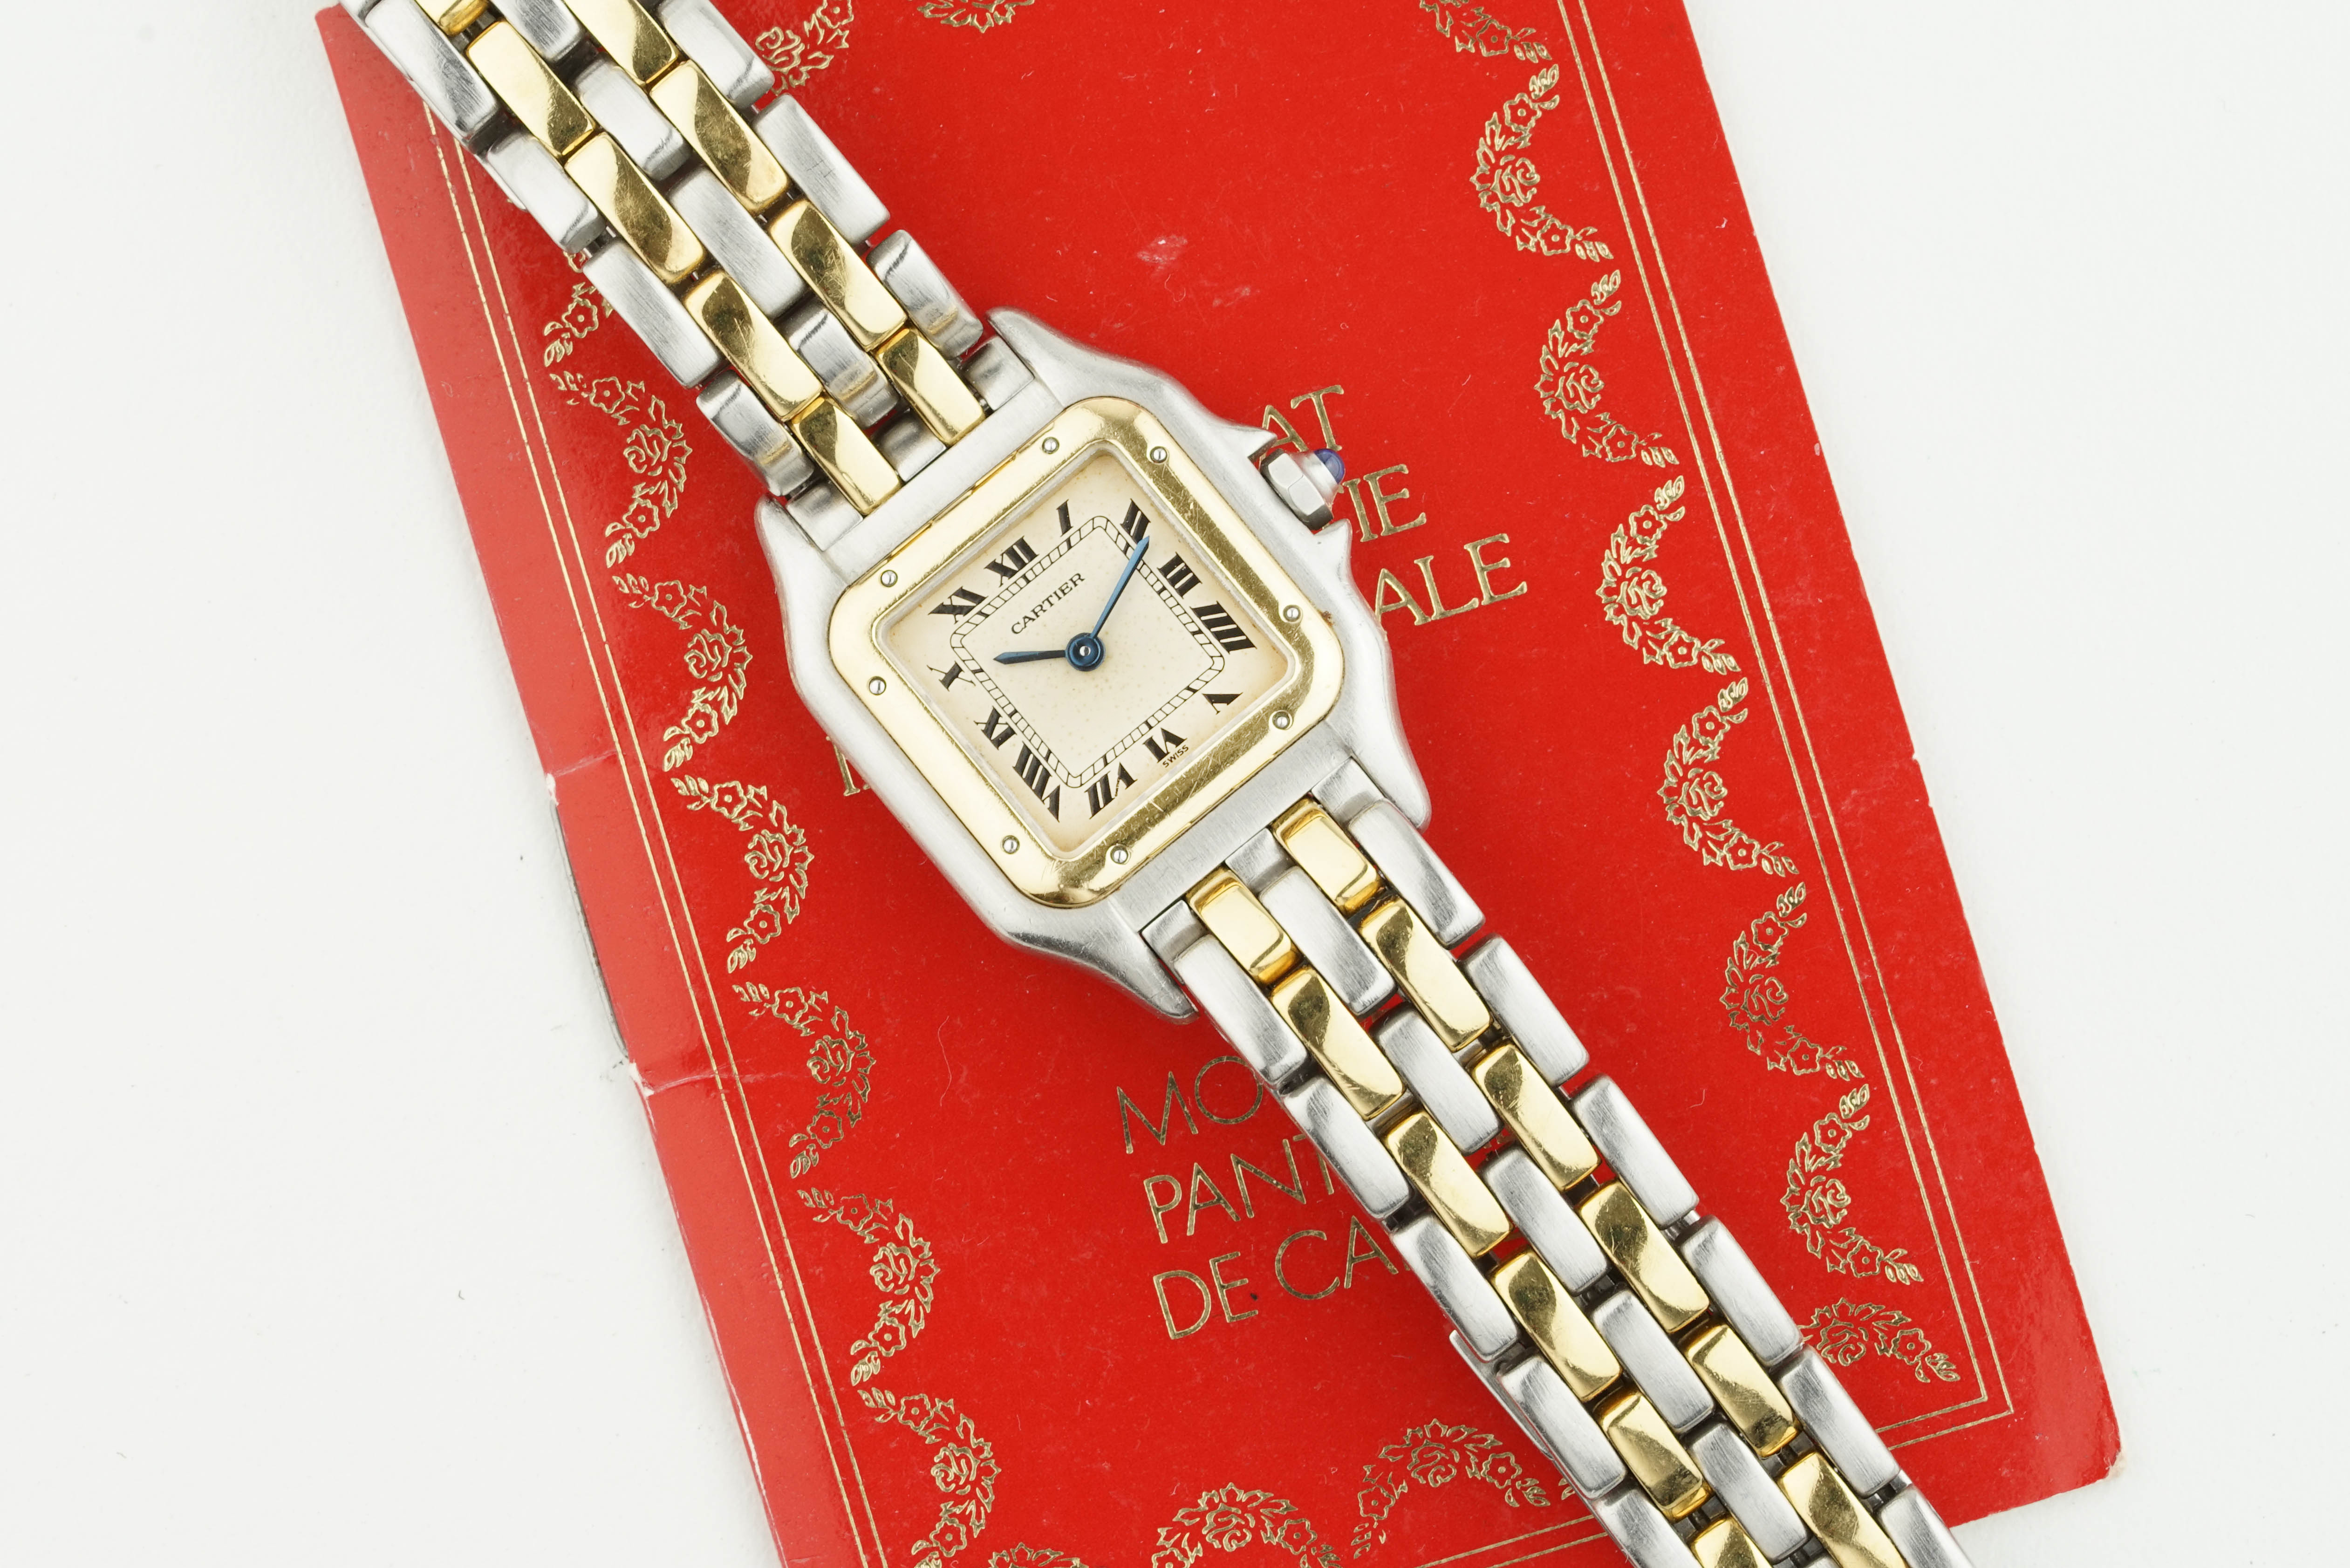 CARTIER PANTHERE STEEL & GOLD W/ GUARANTEE PAPERS